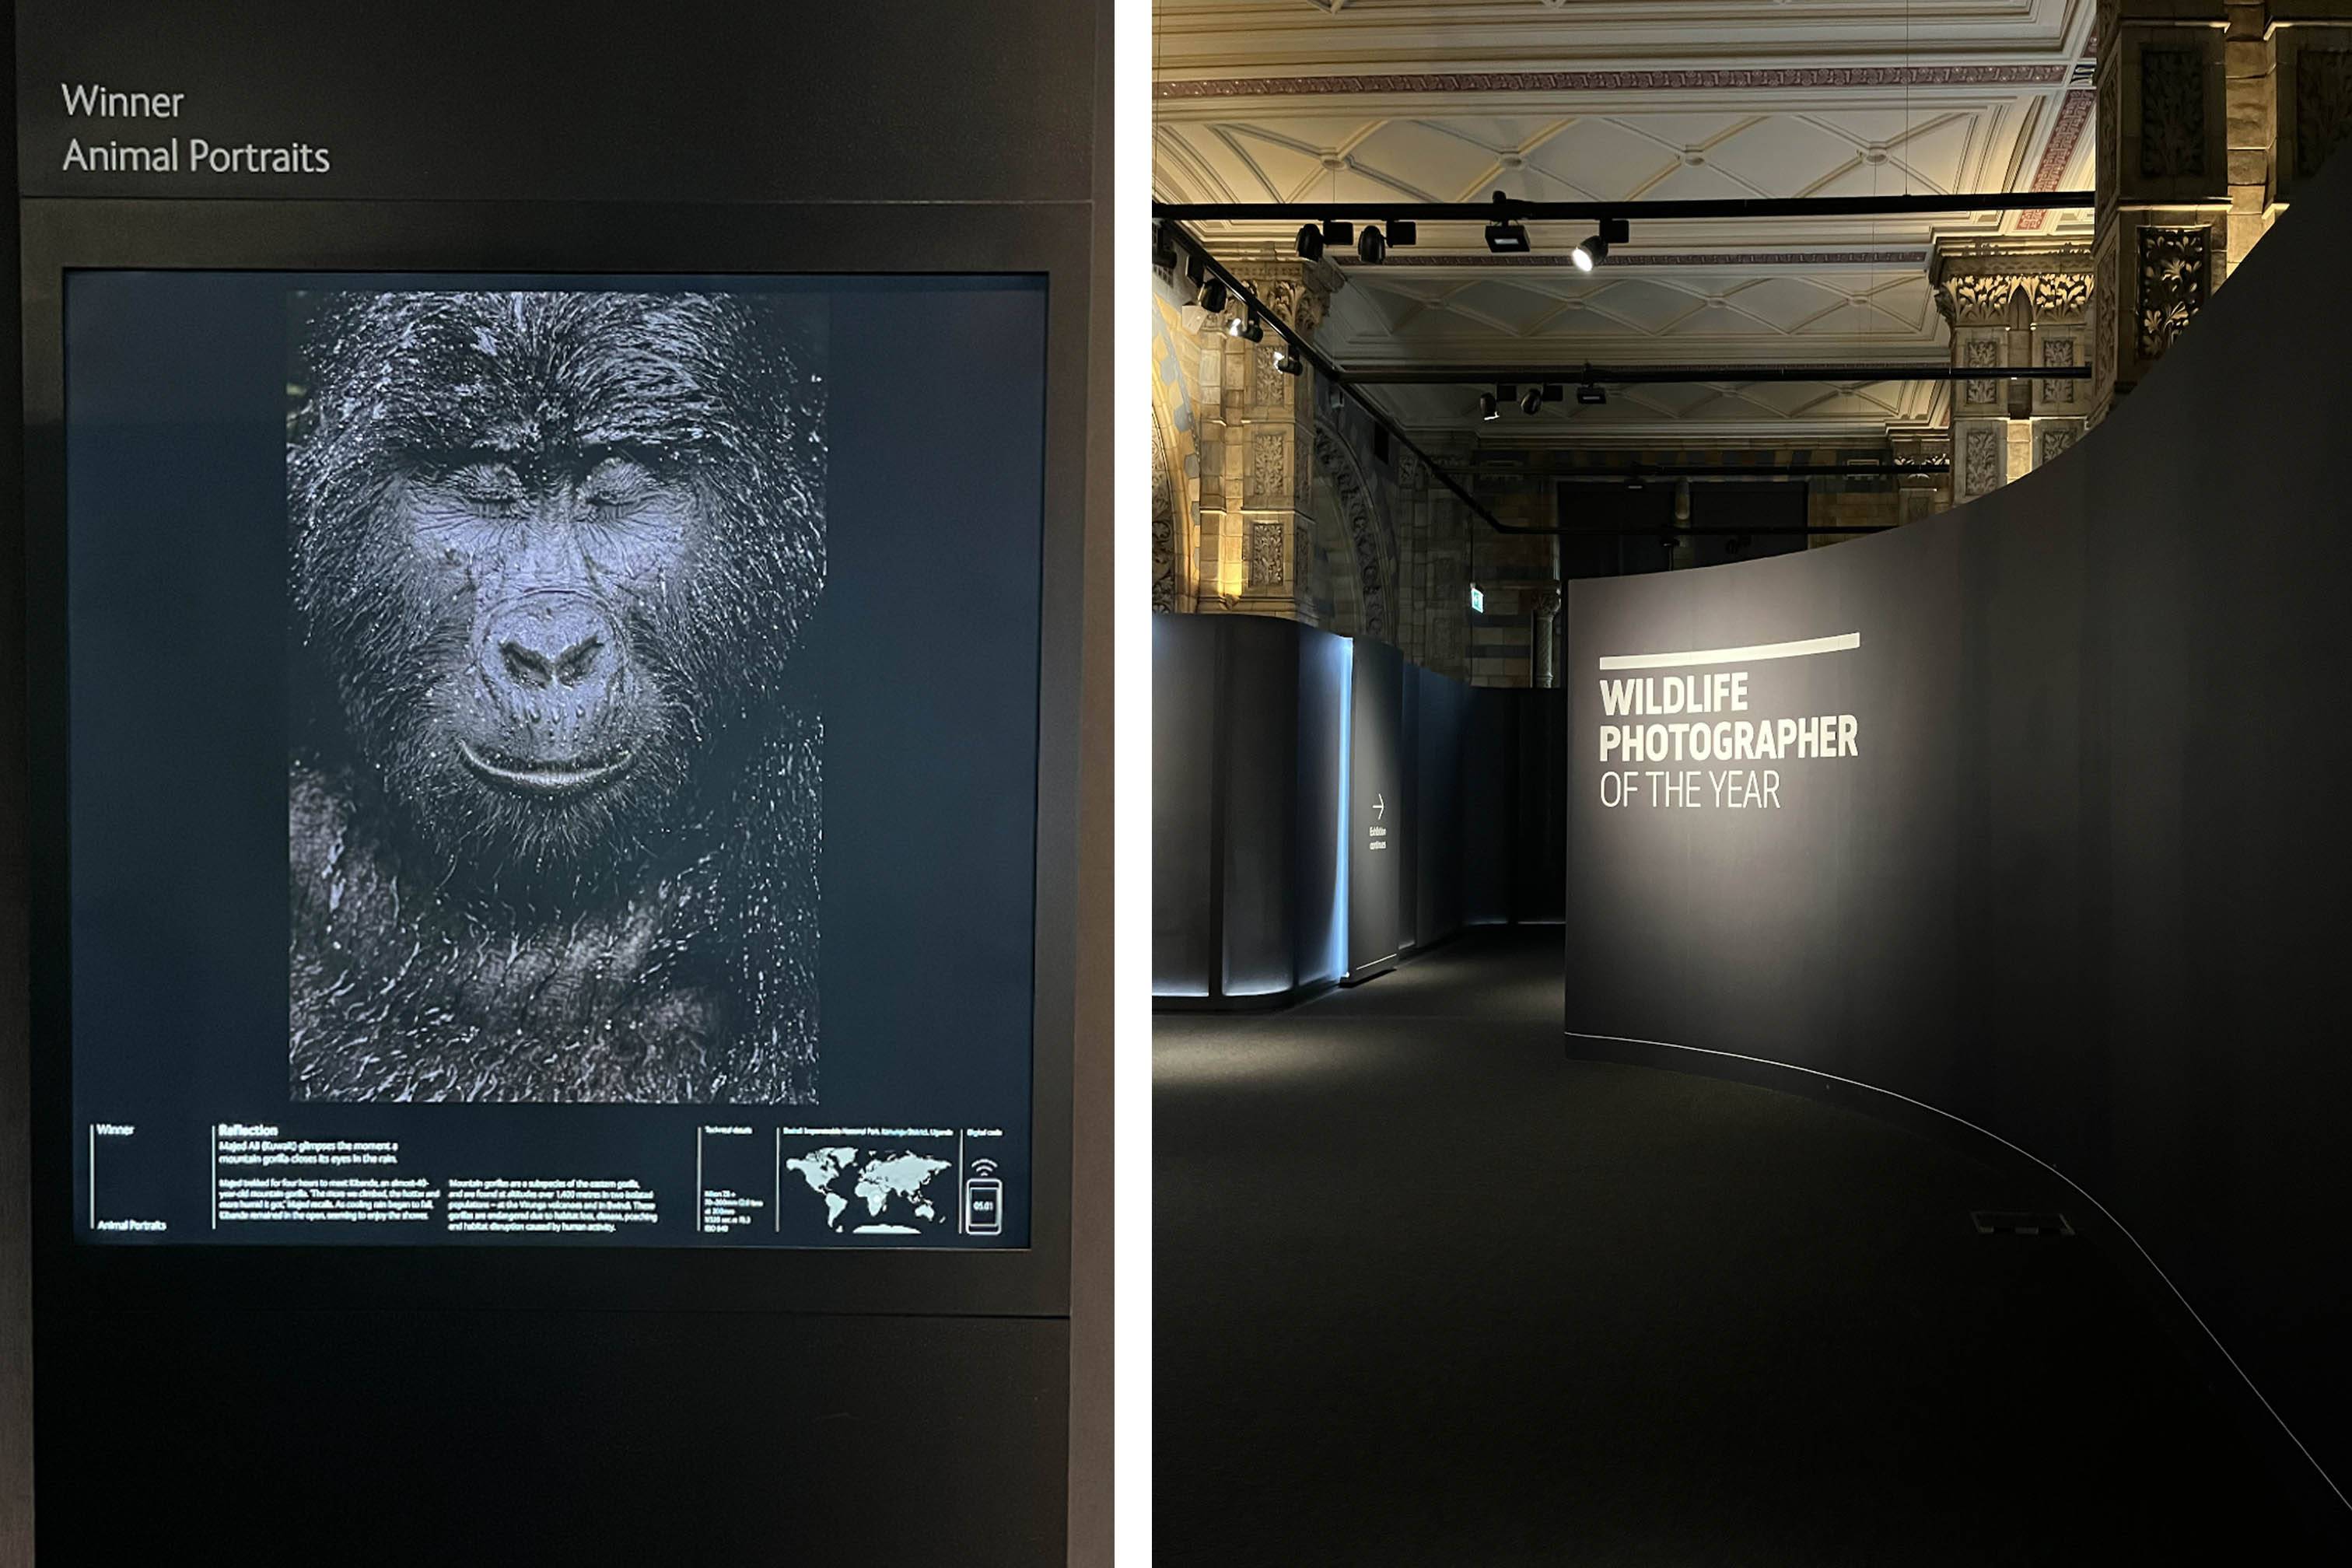 Wildlife Photographer of the Year exhibition, Hire the Wildlife Photographer of the Year Exhibition, Natural History Museum Event Spaces,  Hire the Natural History Museum, Natural History Museum Wedding, Natural History Museum Private Event, Natural History Museum Brand Launch